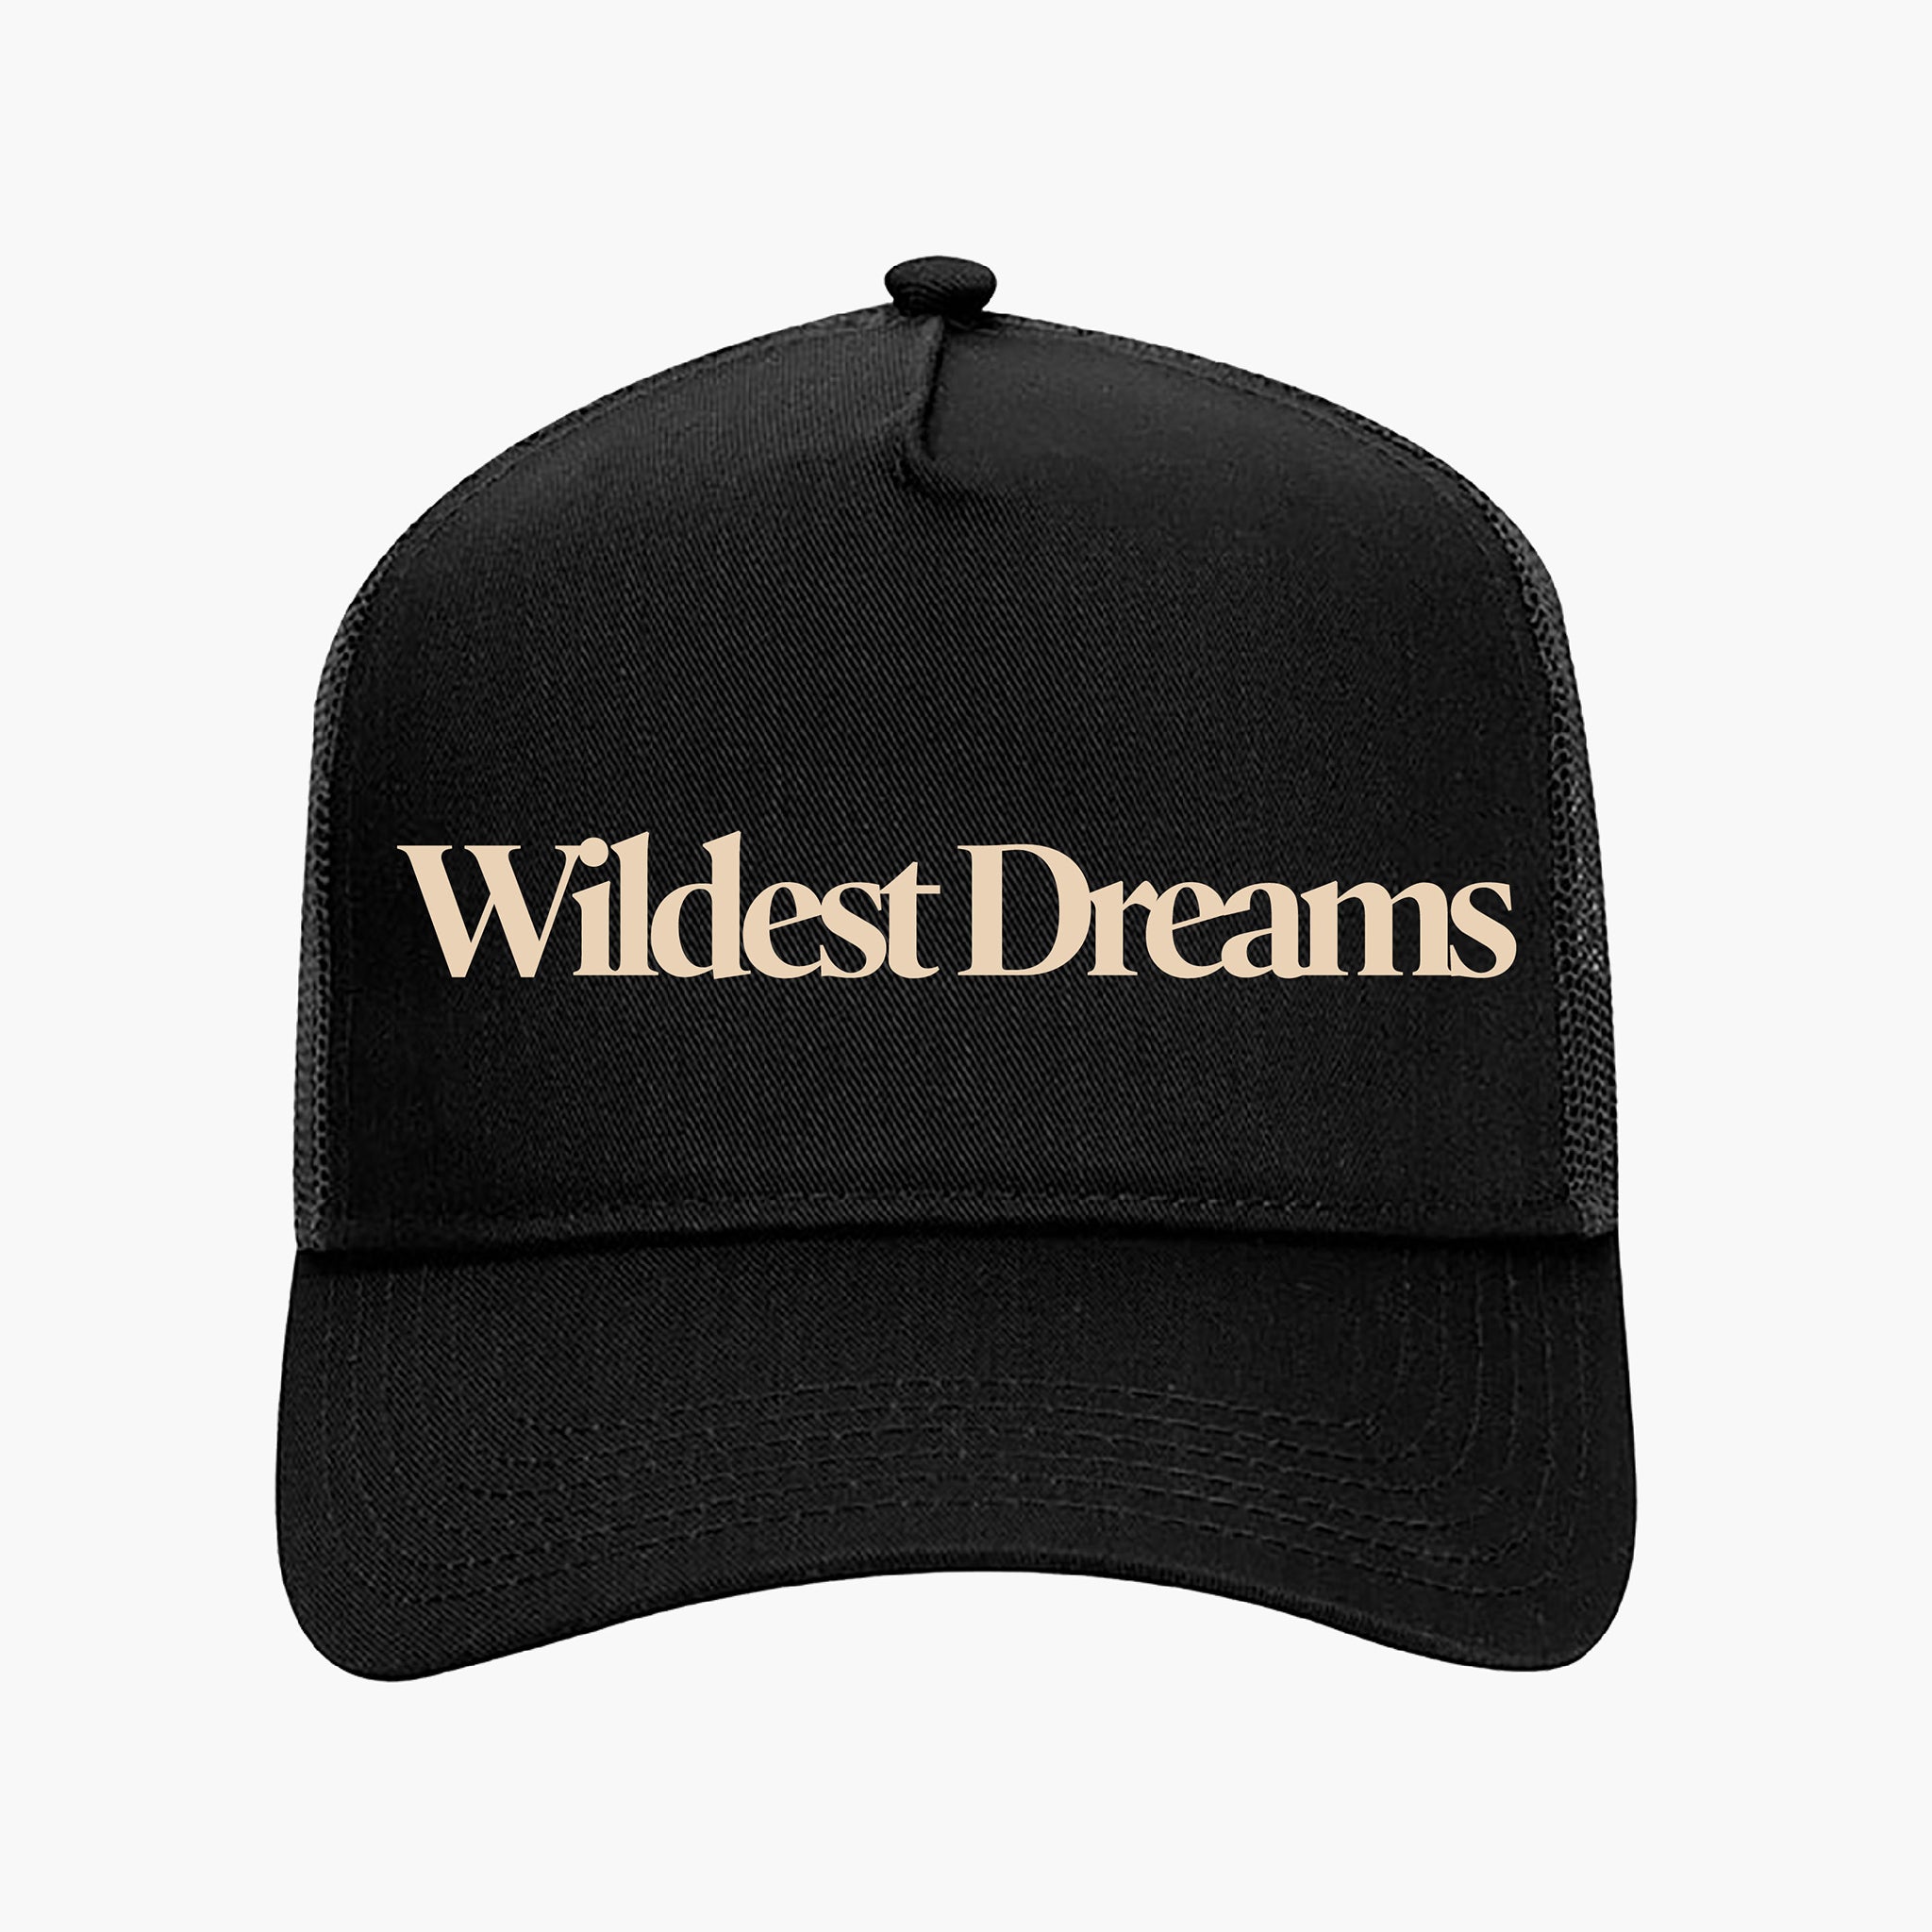 Wildest Dreams Trucker Hat - Frequently Asked Questions